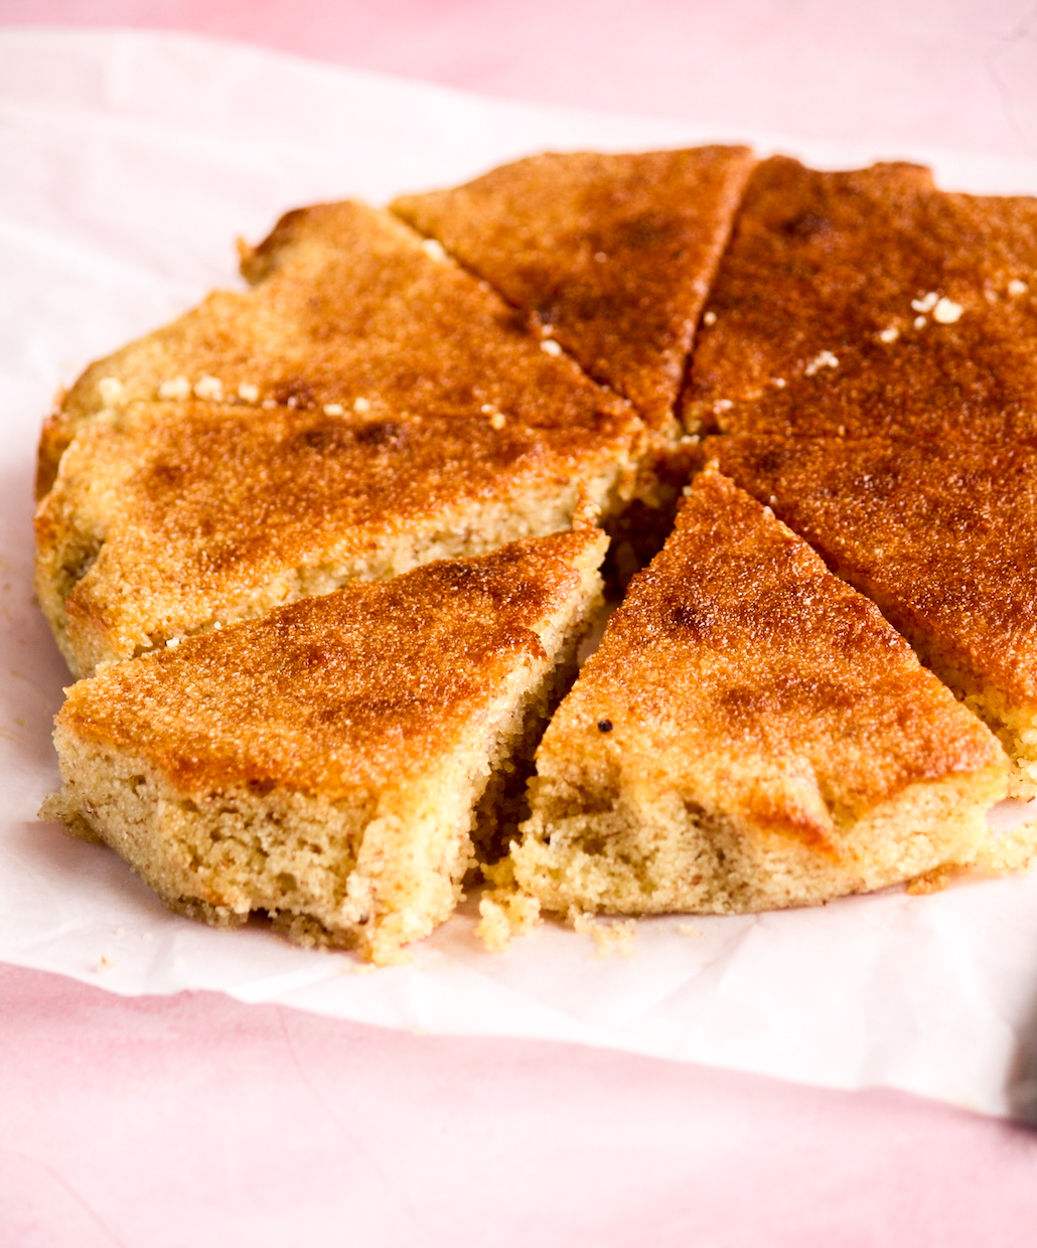 Super moist lemon syrup cake made with semolina and almonds